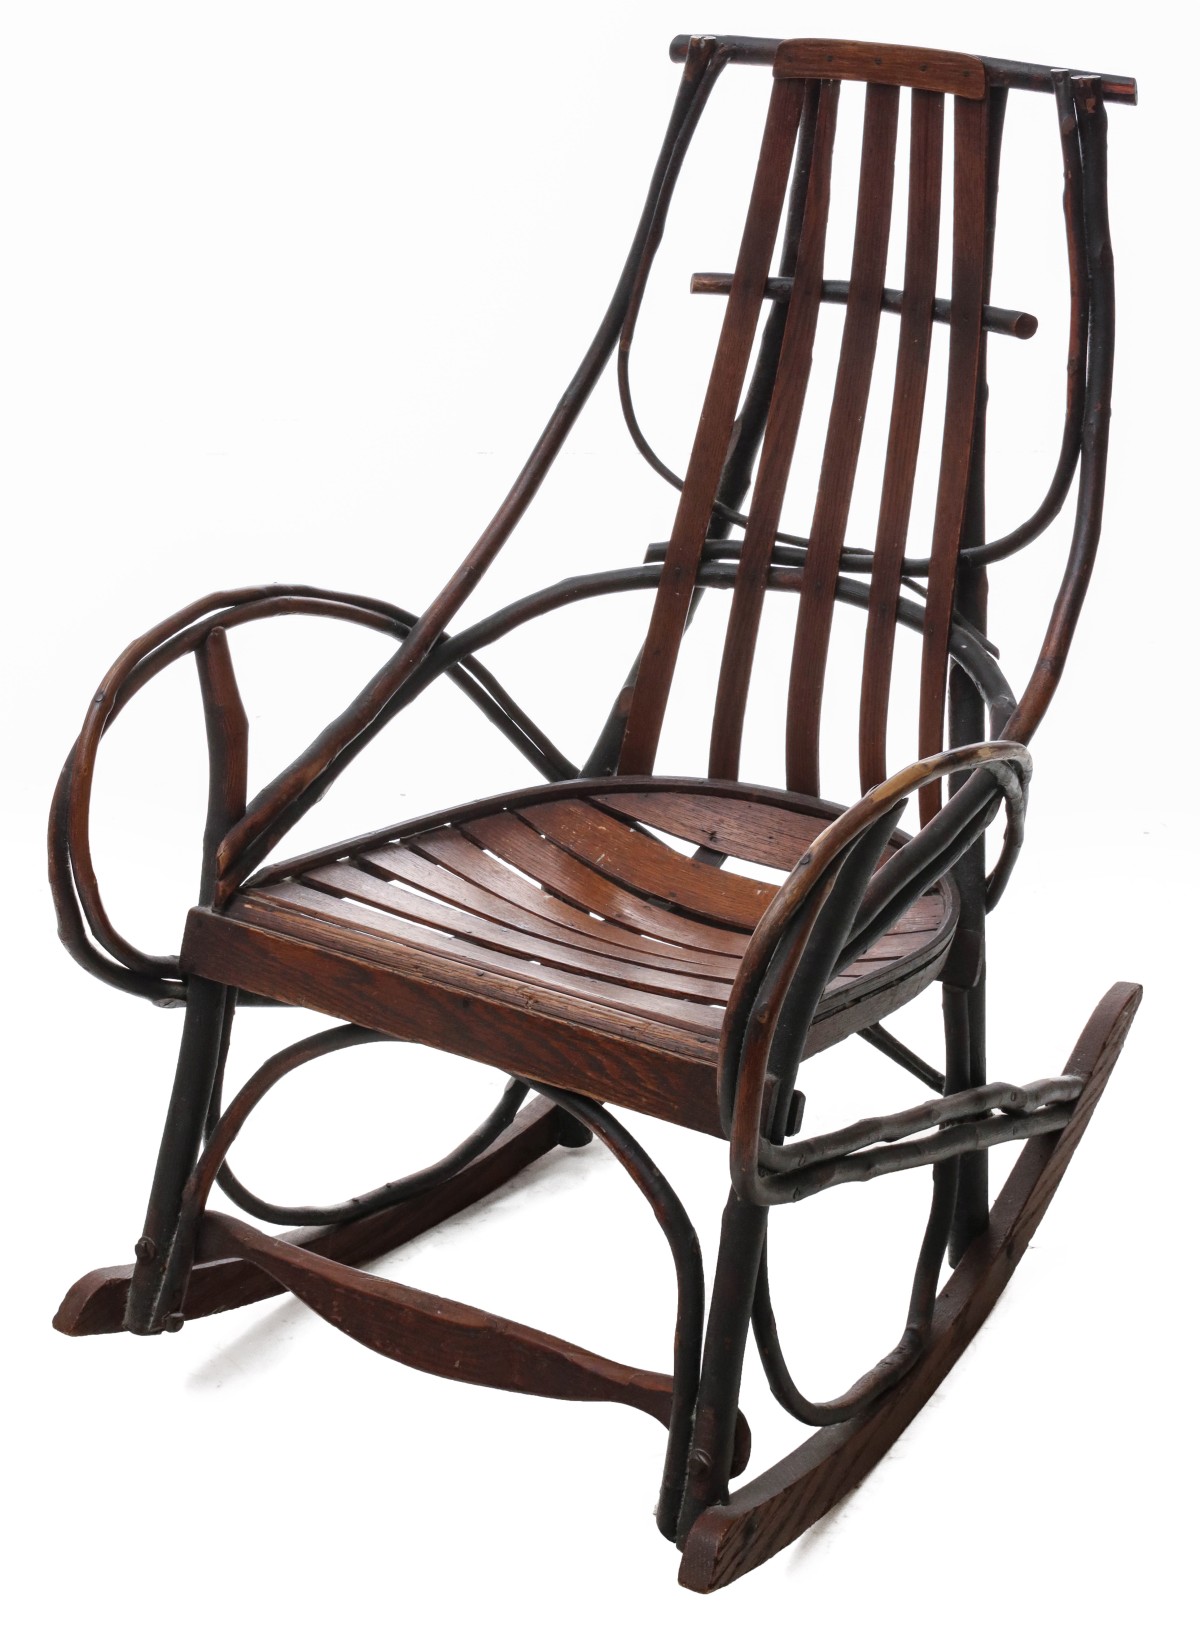 A FOLKY ADIRONDACK TYPE BENTWOOD AND TWIG ROCKING CHAIR